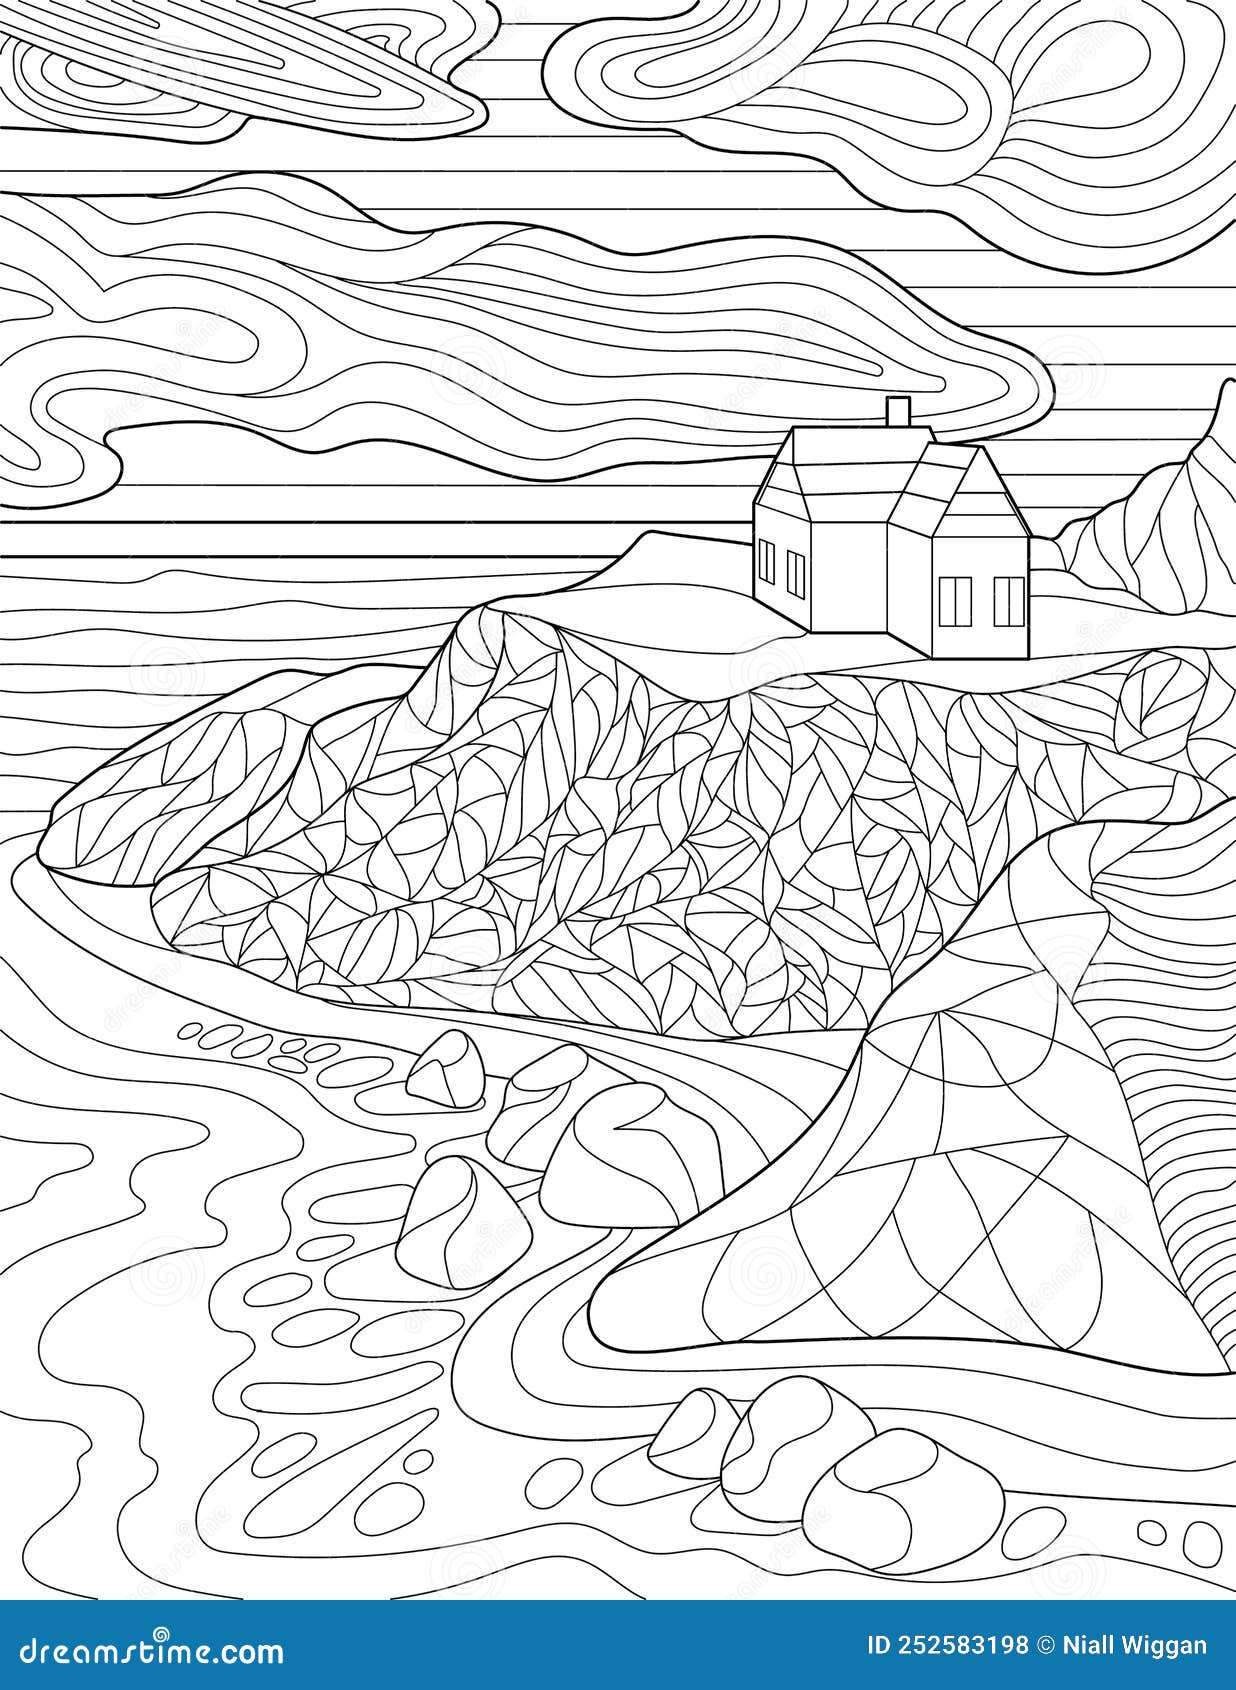 https://thumbs.dreamstime.com/z/coloring-page-detailed-house-hill-clouds-rocks-ocean-sheet-to-be-colored-home-top-cliff-see-below-252583198.jpg